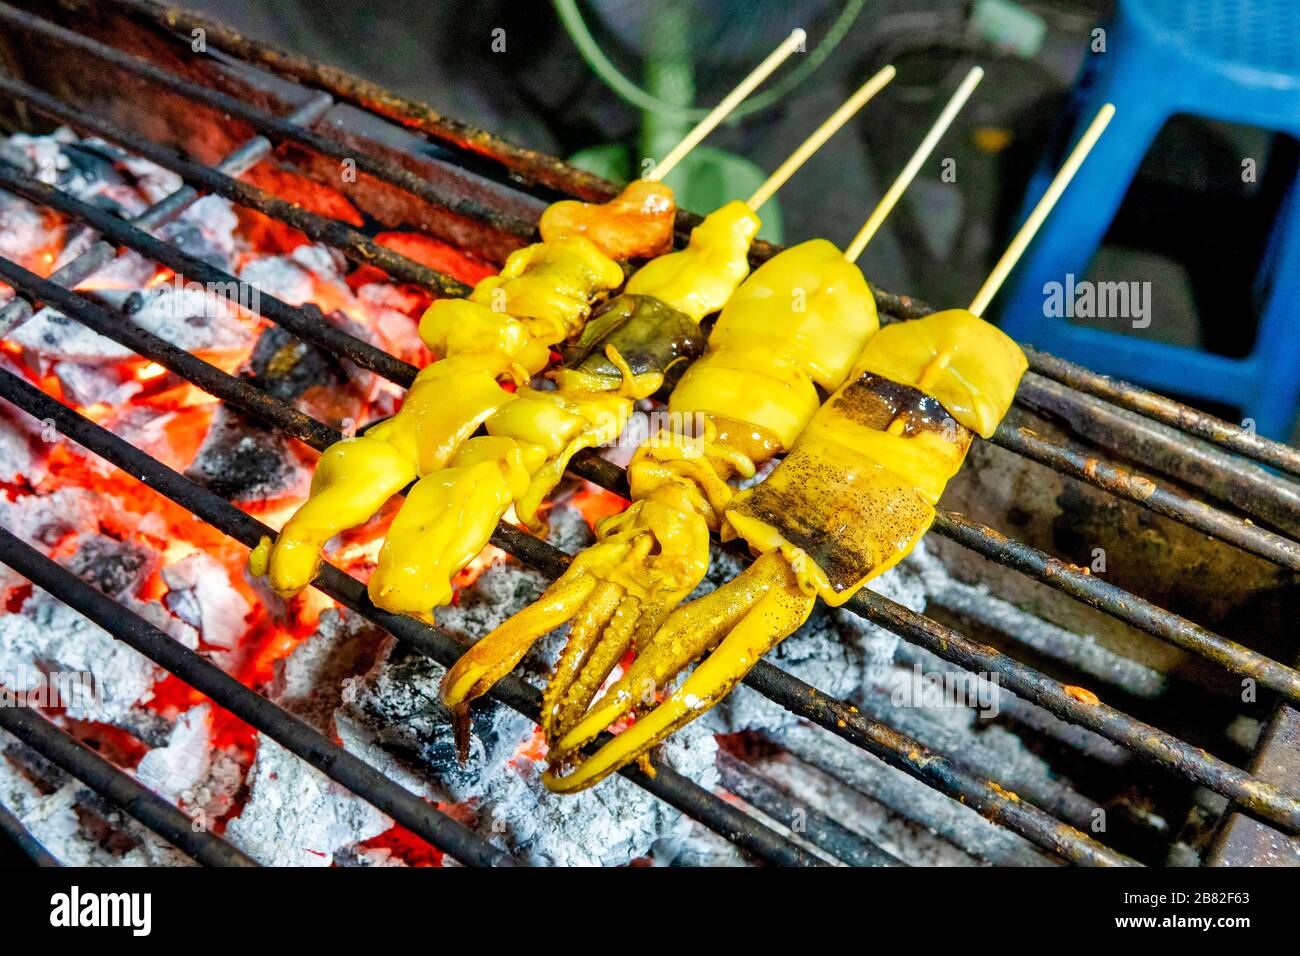 Plaa Mhuk Yang (Thai grilled squids) on a grill Stock Photo